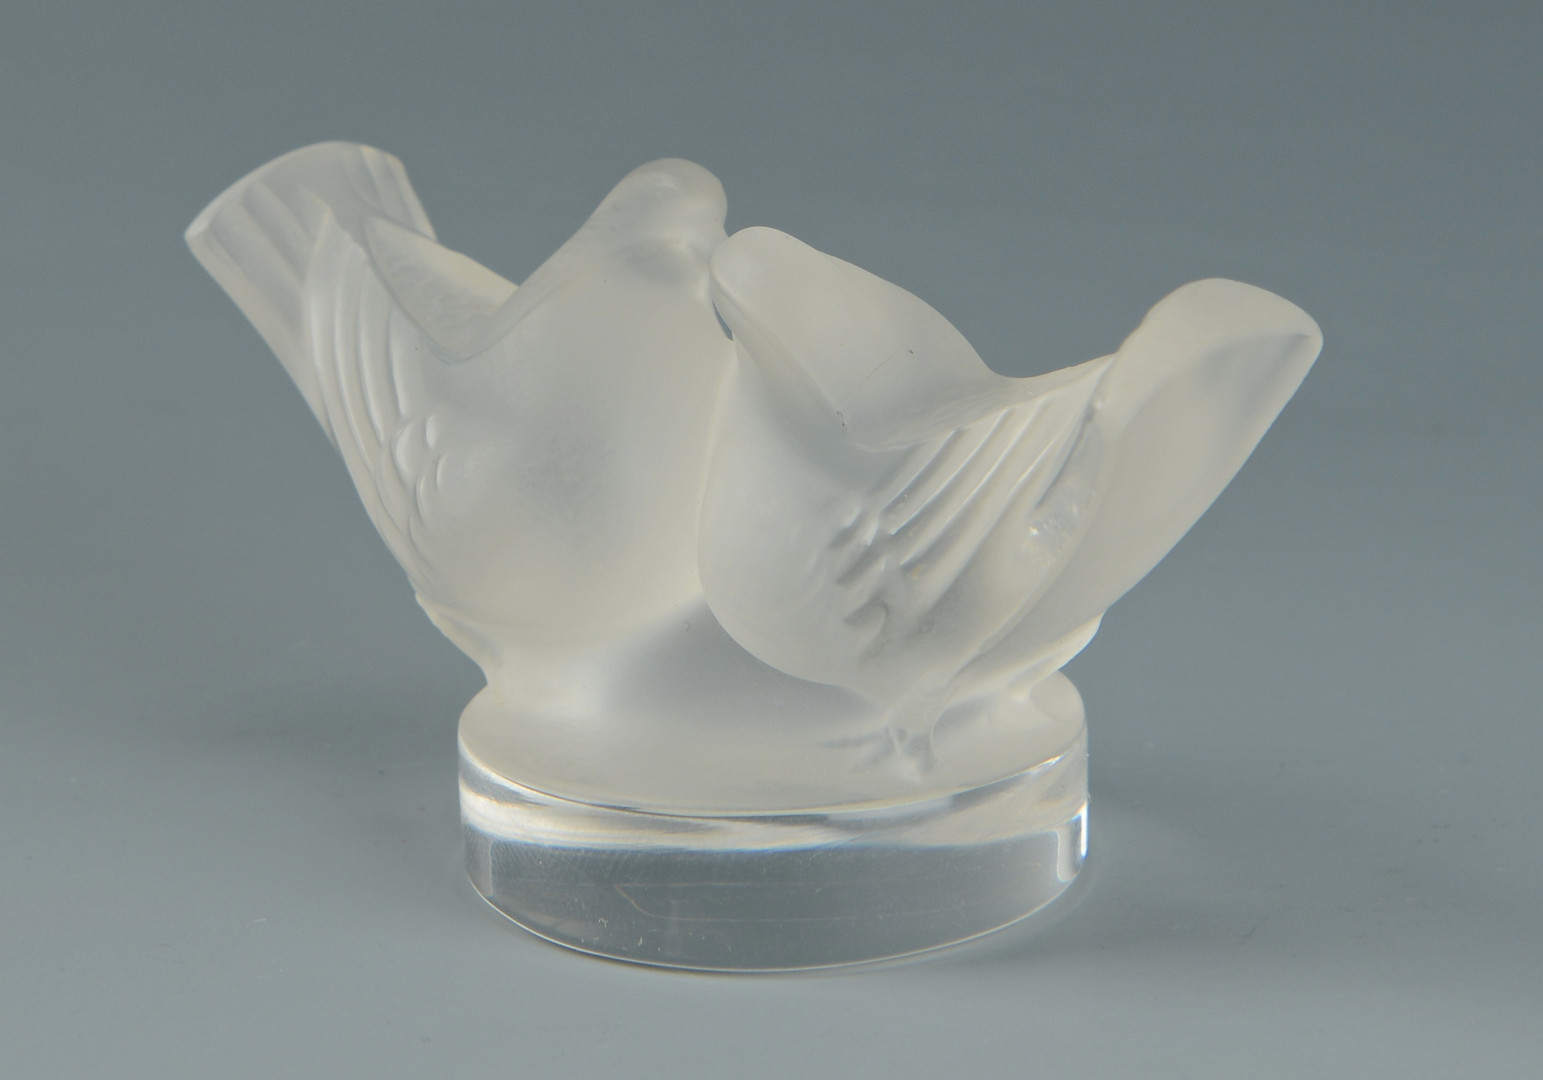 Lot 164: 4 Articles of Lalique Crystal